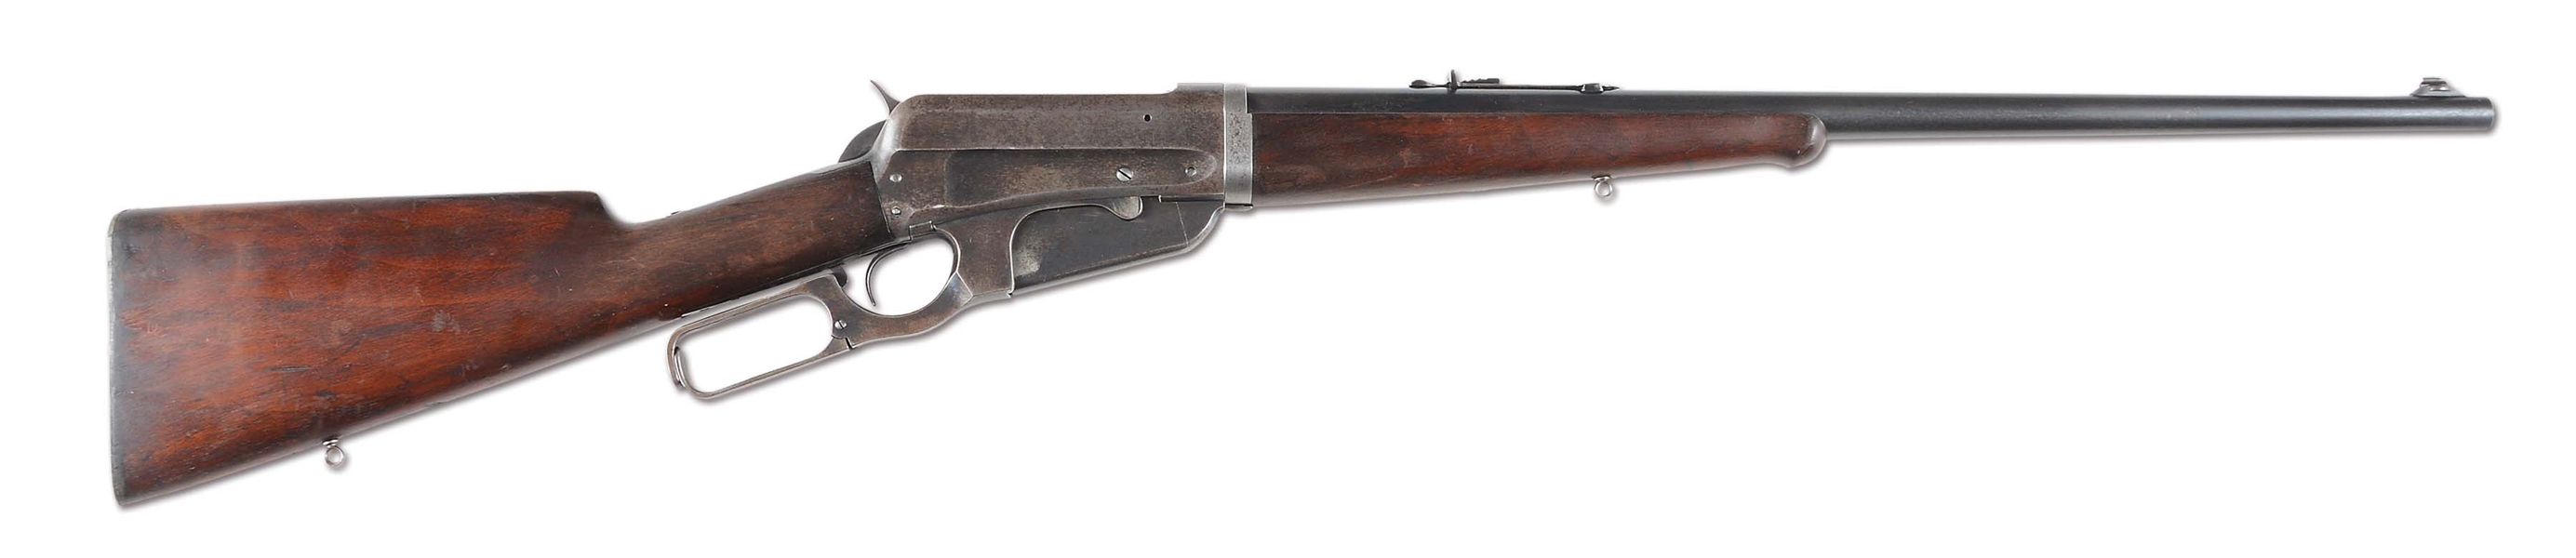 (C) WINCHESTER MODEL 1895 TAKEDOWN .405 LEVER ACTION RIFLE (1915).